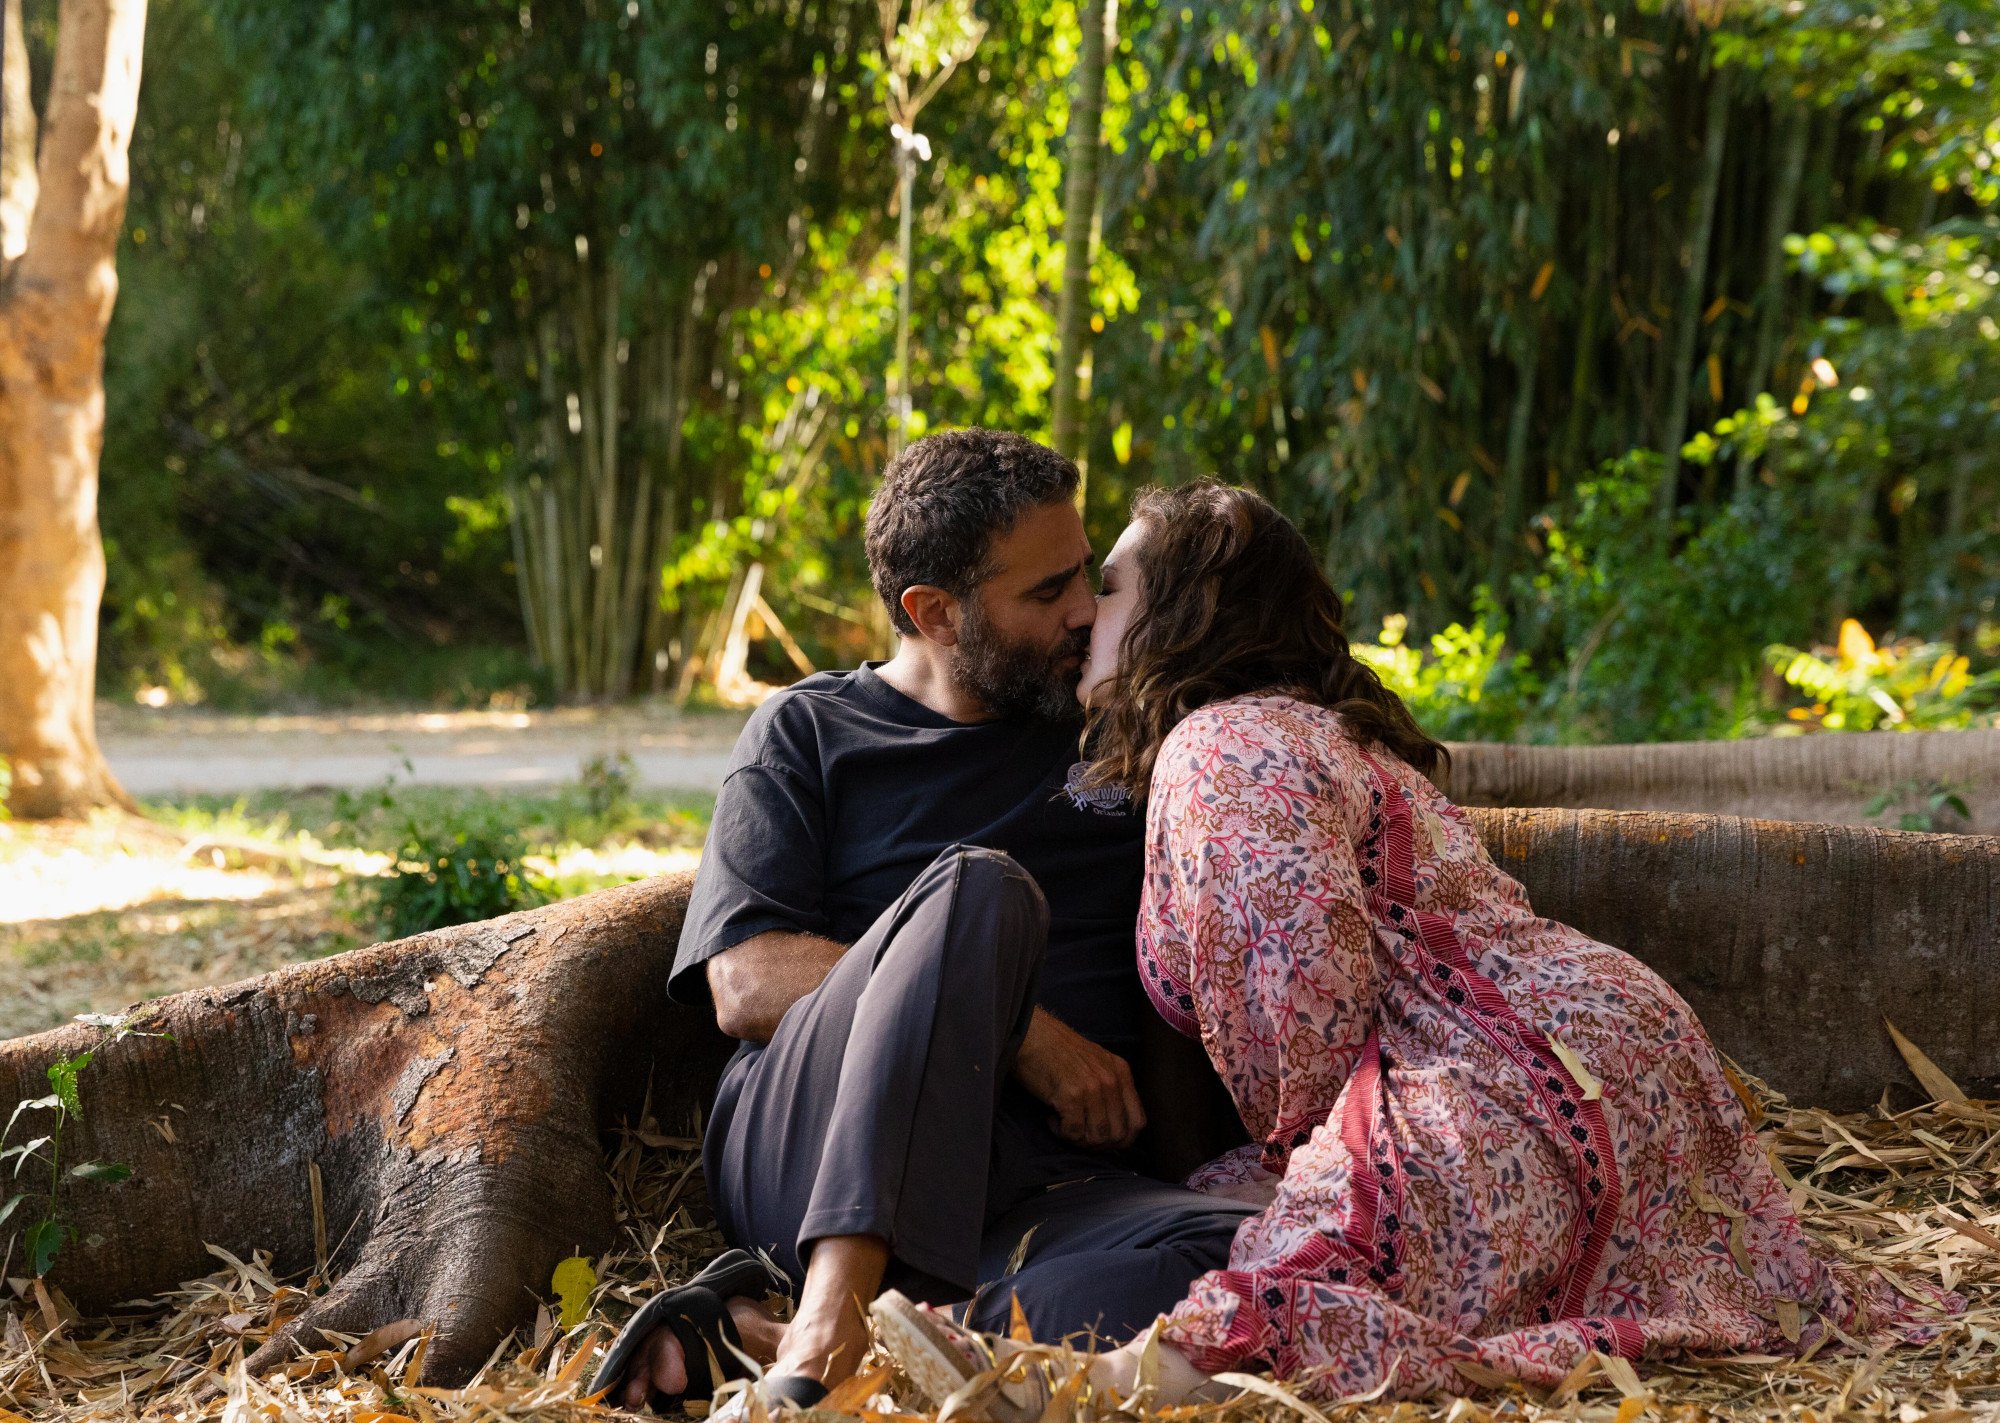 Bobby Cannavale as Tony and Melissa McCarthy as Frances in Hulu's 'Nine Perfect Strangers' Episode 6. They're kissing beneath a tree. Frances wears a pink dress and Tony wears dark pants and a black T-shirt.